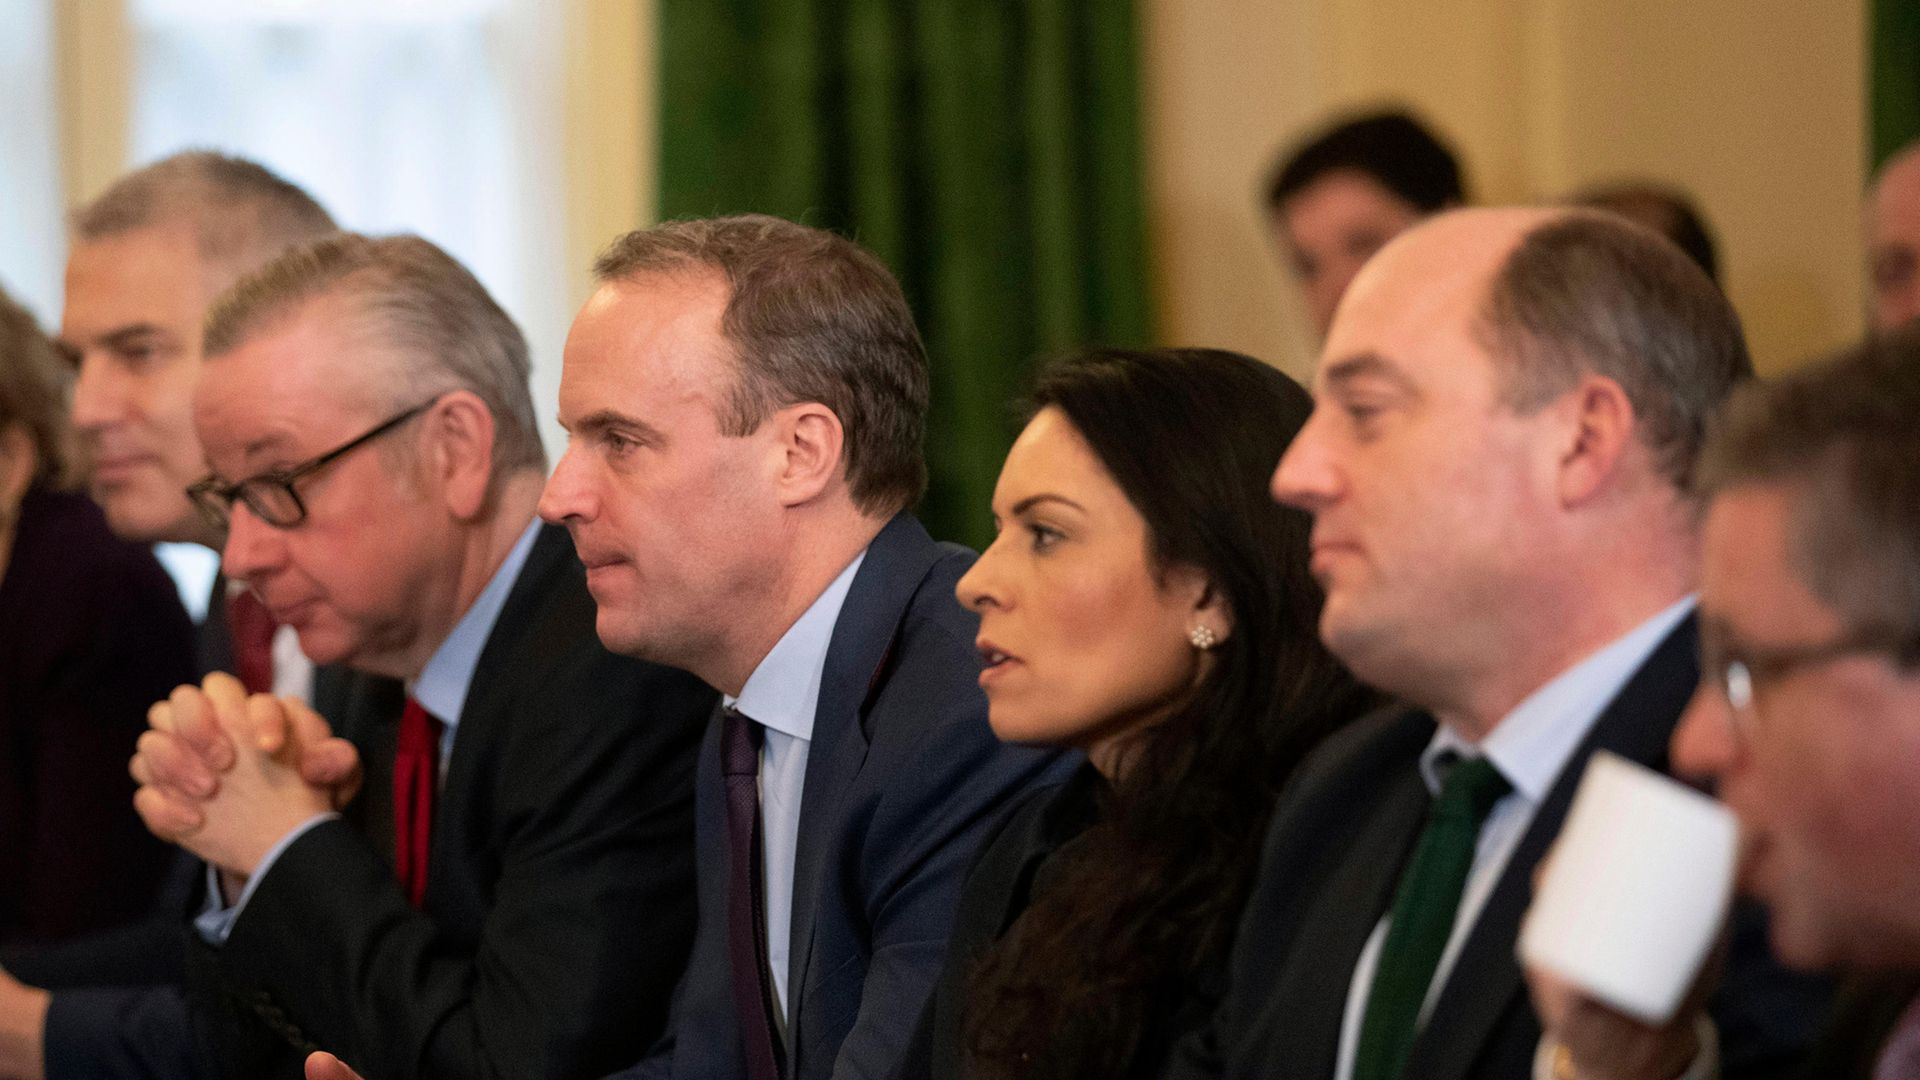 Foreign Secretary Dominic Raab with Home Secretary Priti Patel, Chancellor of the Duchy of Lancaster Michael Gove and Defence Secretary Ben Wallace listen as Prime Minister Boris Johnson holds a cabinet meeting - Credit: PA